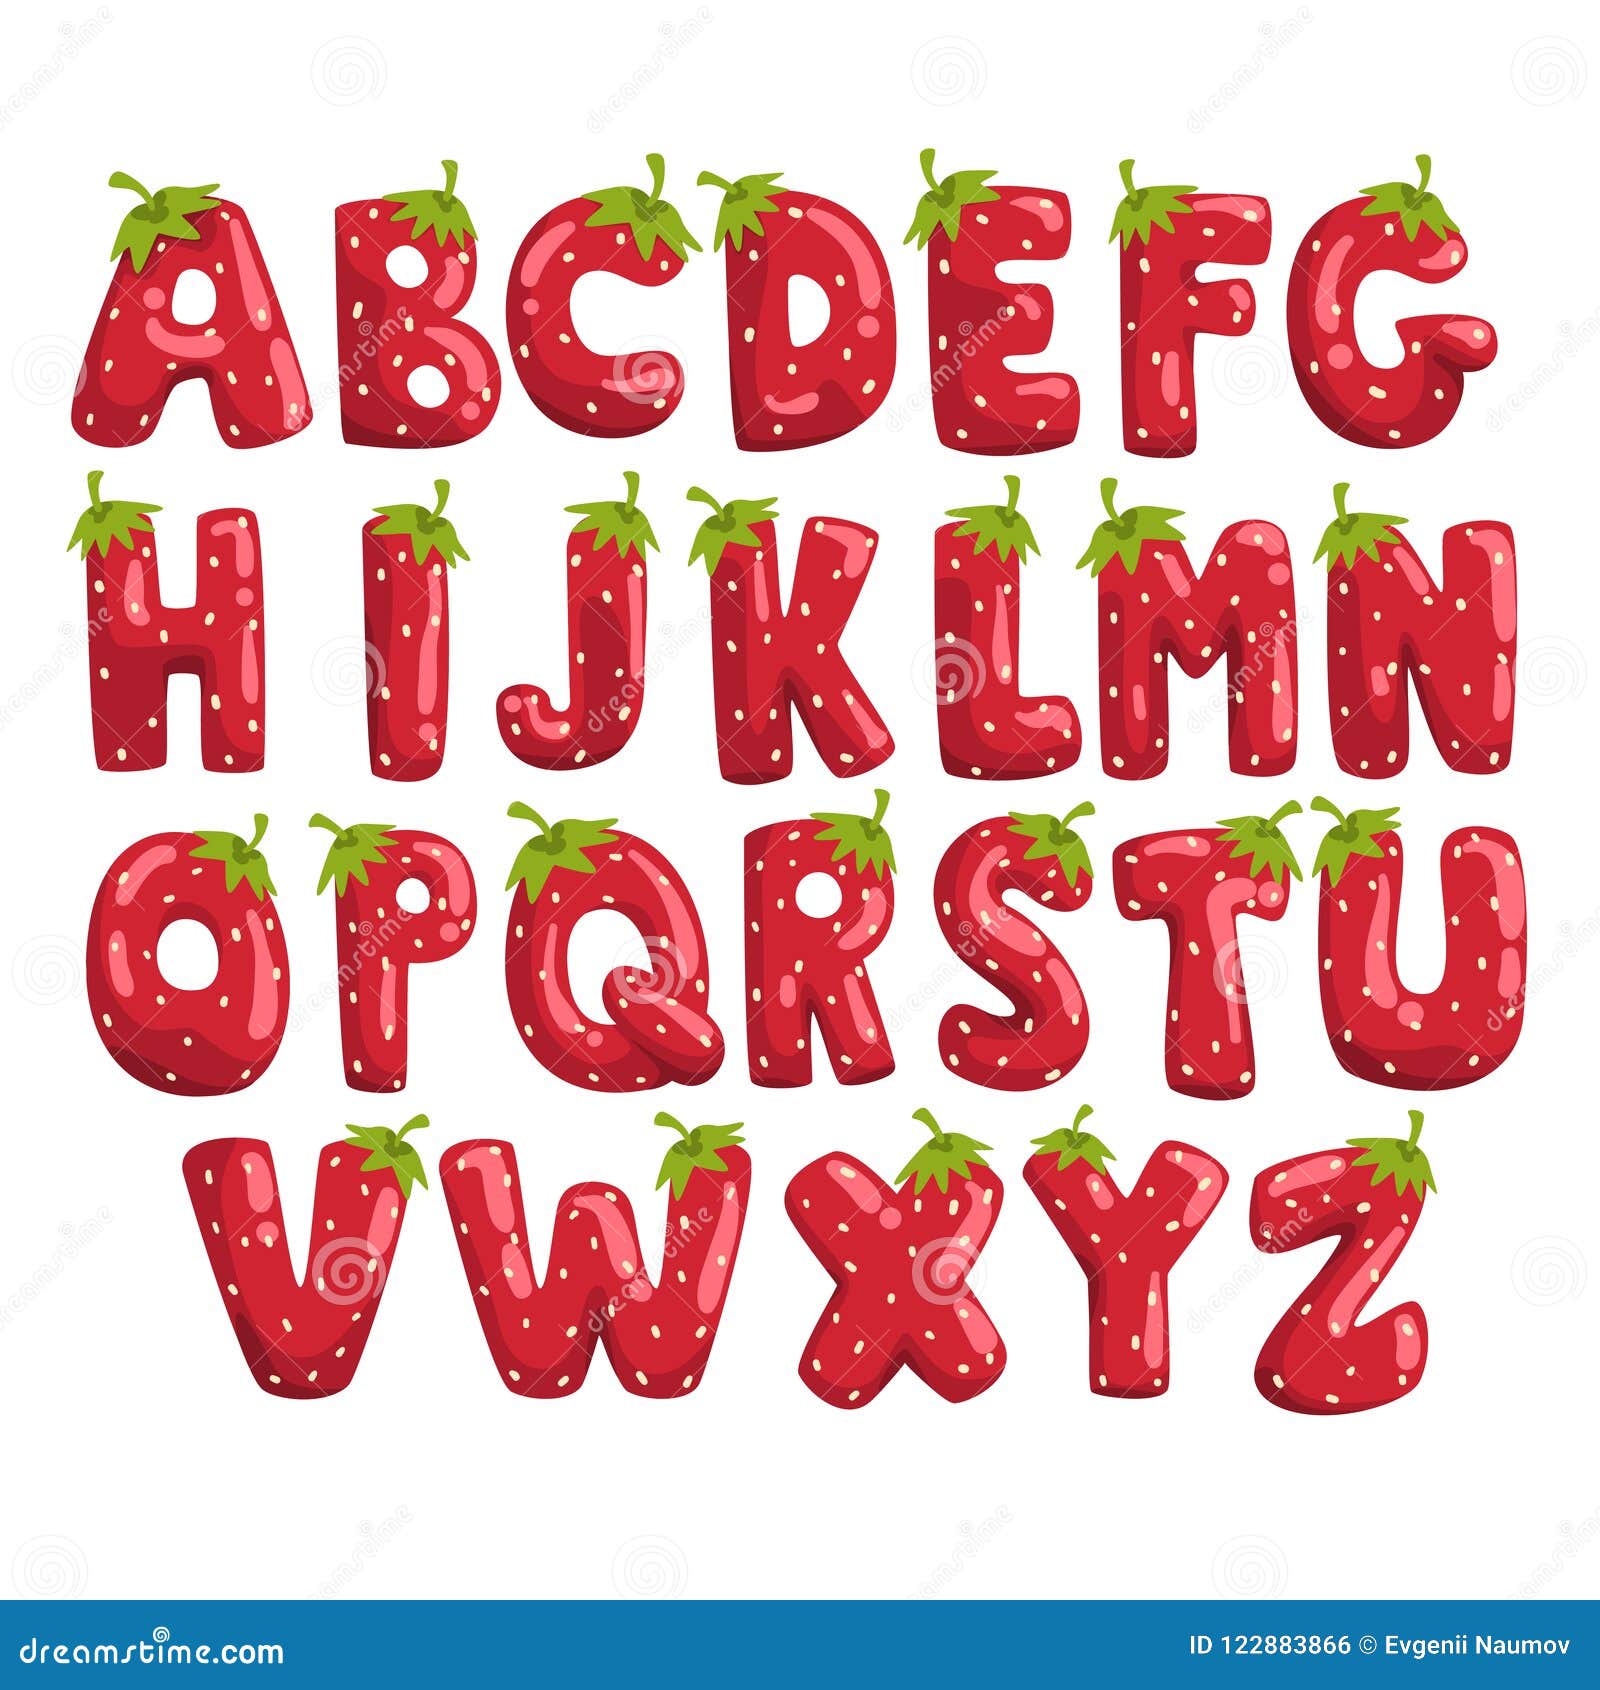 Ripe Fresh Strawberry English Alphabet Bright Red Berry Font Vector Illustrations On A White Background Stock Vector Illustration Of Organic Ripe 122883866